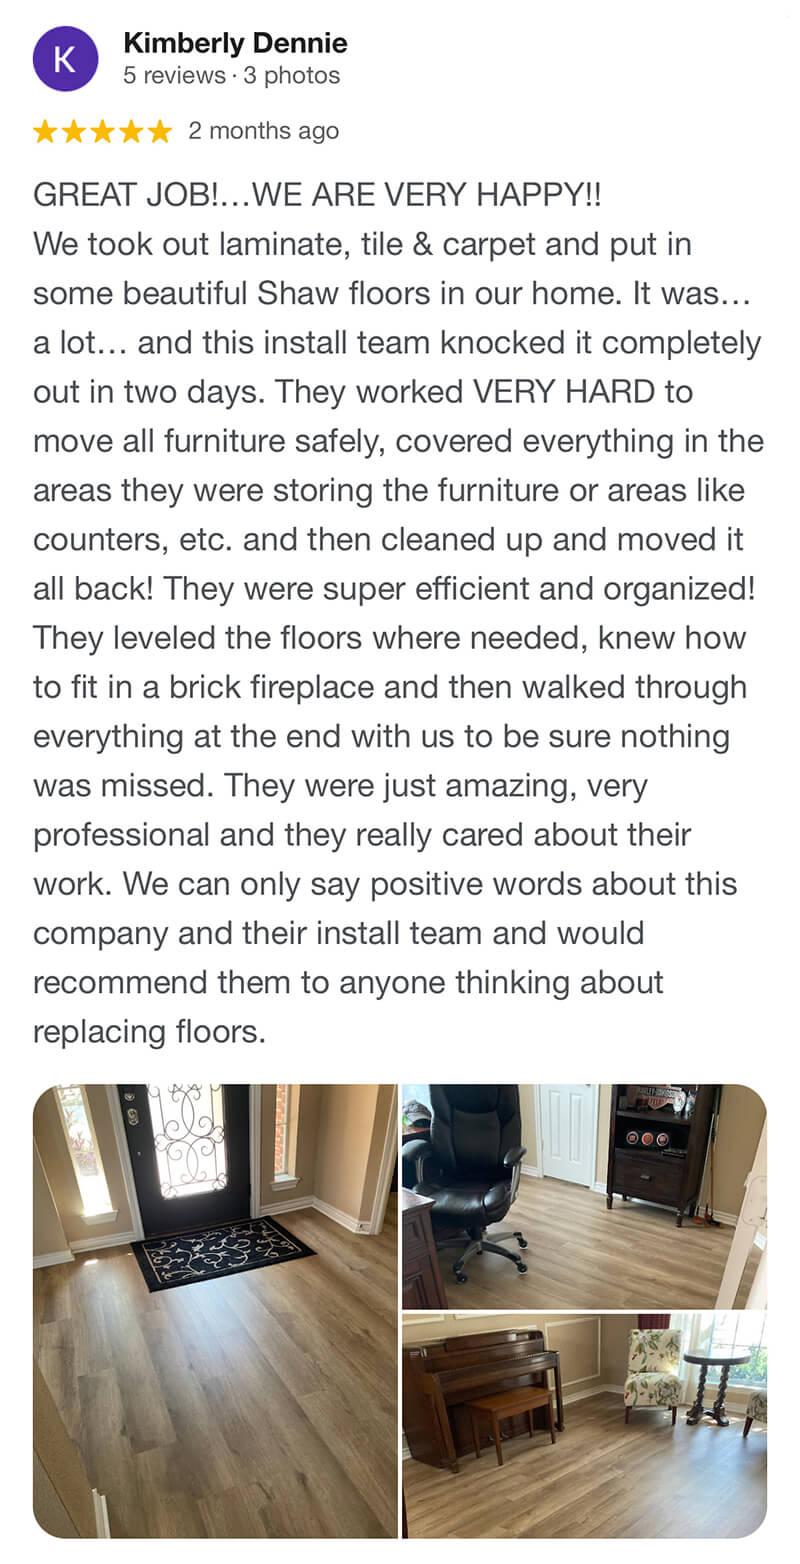 Kimberly-GREAT JOB!…WE ARE VERY HAPPY!! We took out laminate, tile & carpet and put in some beautiful Shaw floors in our home. It was… a lot… and this install team knocked it completely out in two days. They worked VERY HARD to move all furniture safely, covered everything in the areas they were storing the furniture or areas like counters, etc. and then cleaned up and moved it all back! They were super efficient and organized! They leveled the floors where needed, knew how to fit in a brick fireplace and then walked through everything at the end with us to be sure nothing was missed. They were just amazing, very professional and they really cared about their work. We can only say positive words about this company and their install team and would recommend them to anyone thinking about replacing floors.